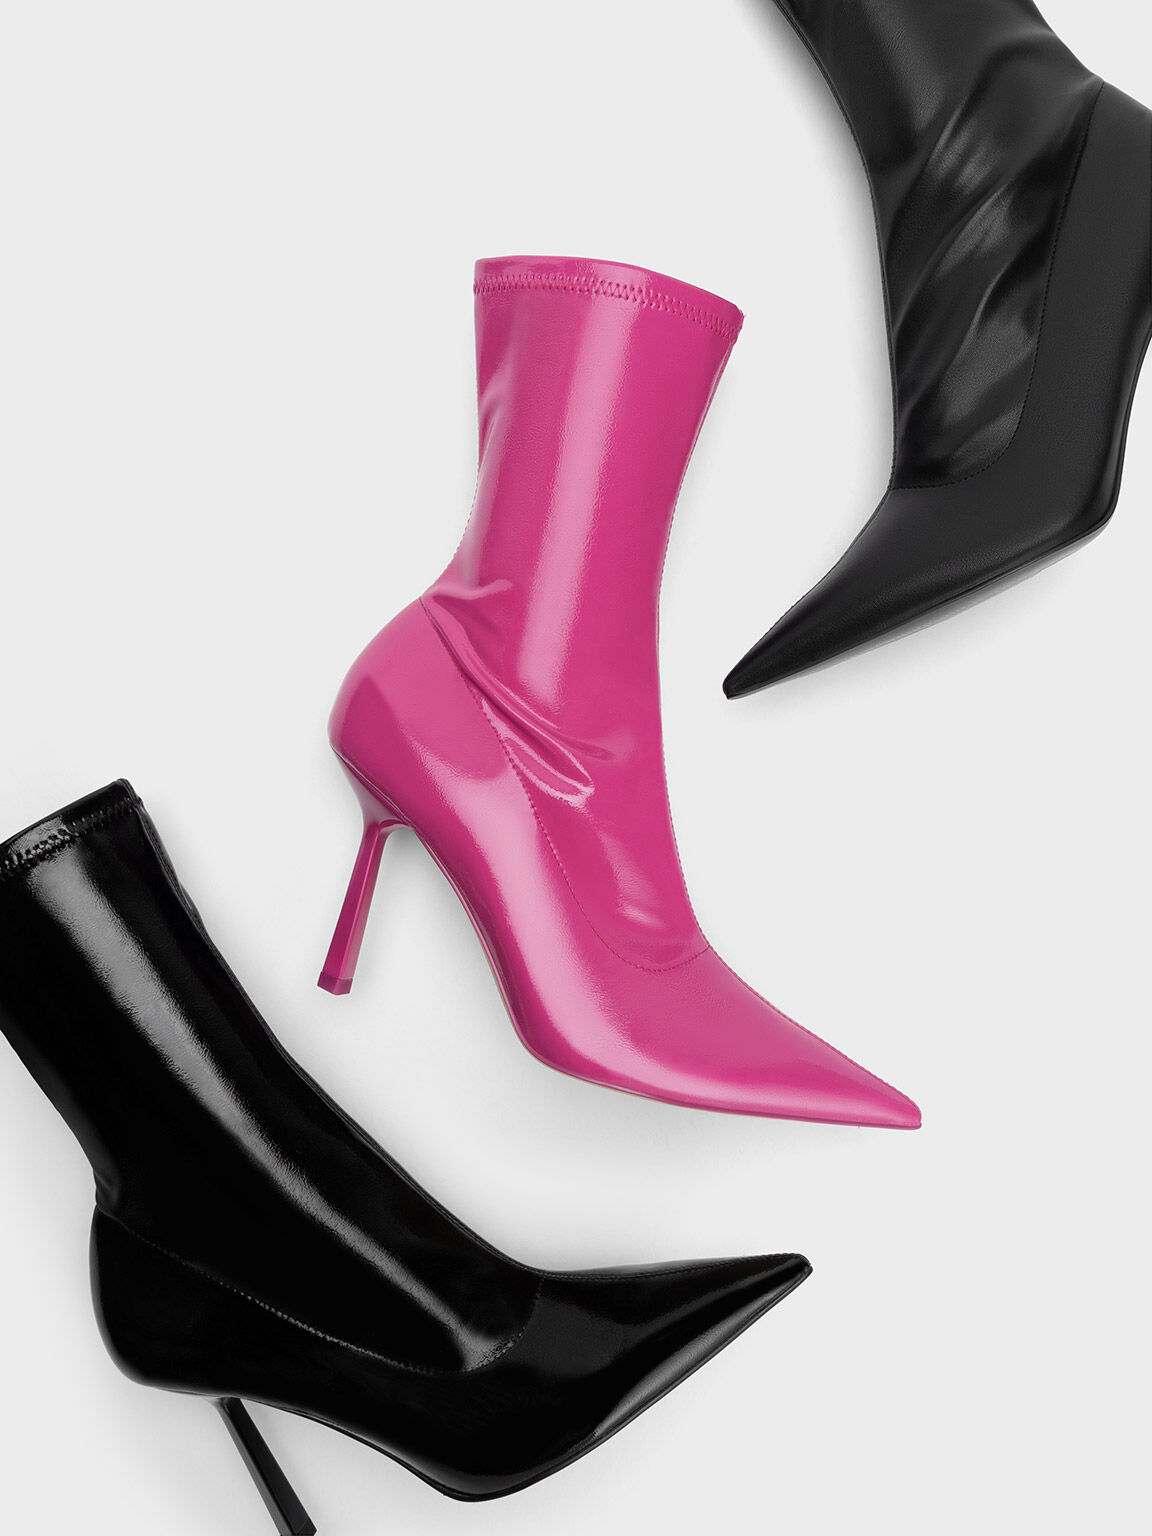 Black Pointed-Toe Stiletto Heel Ankle Boots - CHARLES & KEITH US